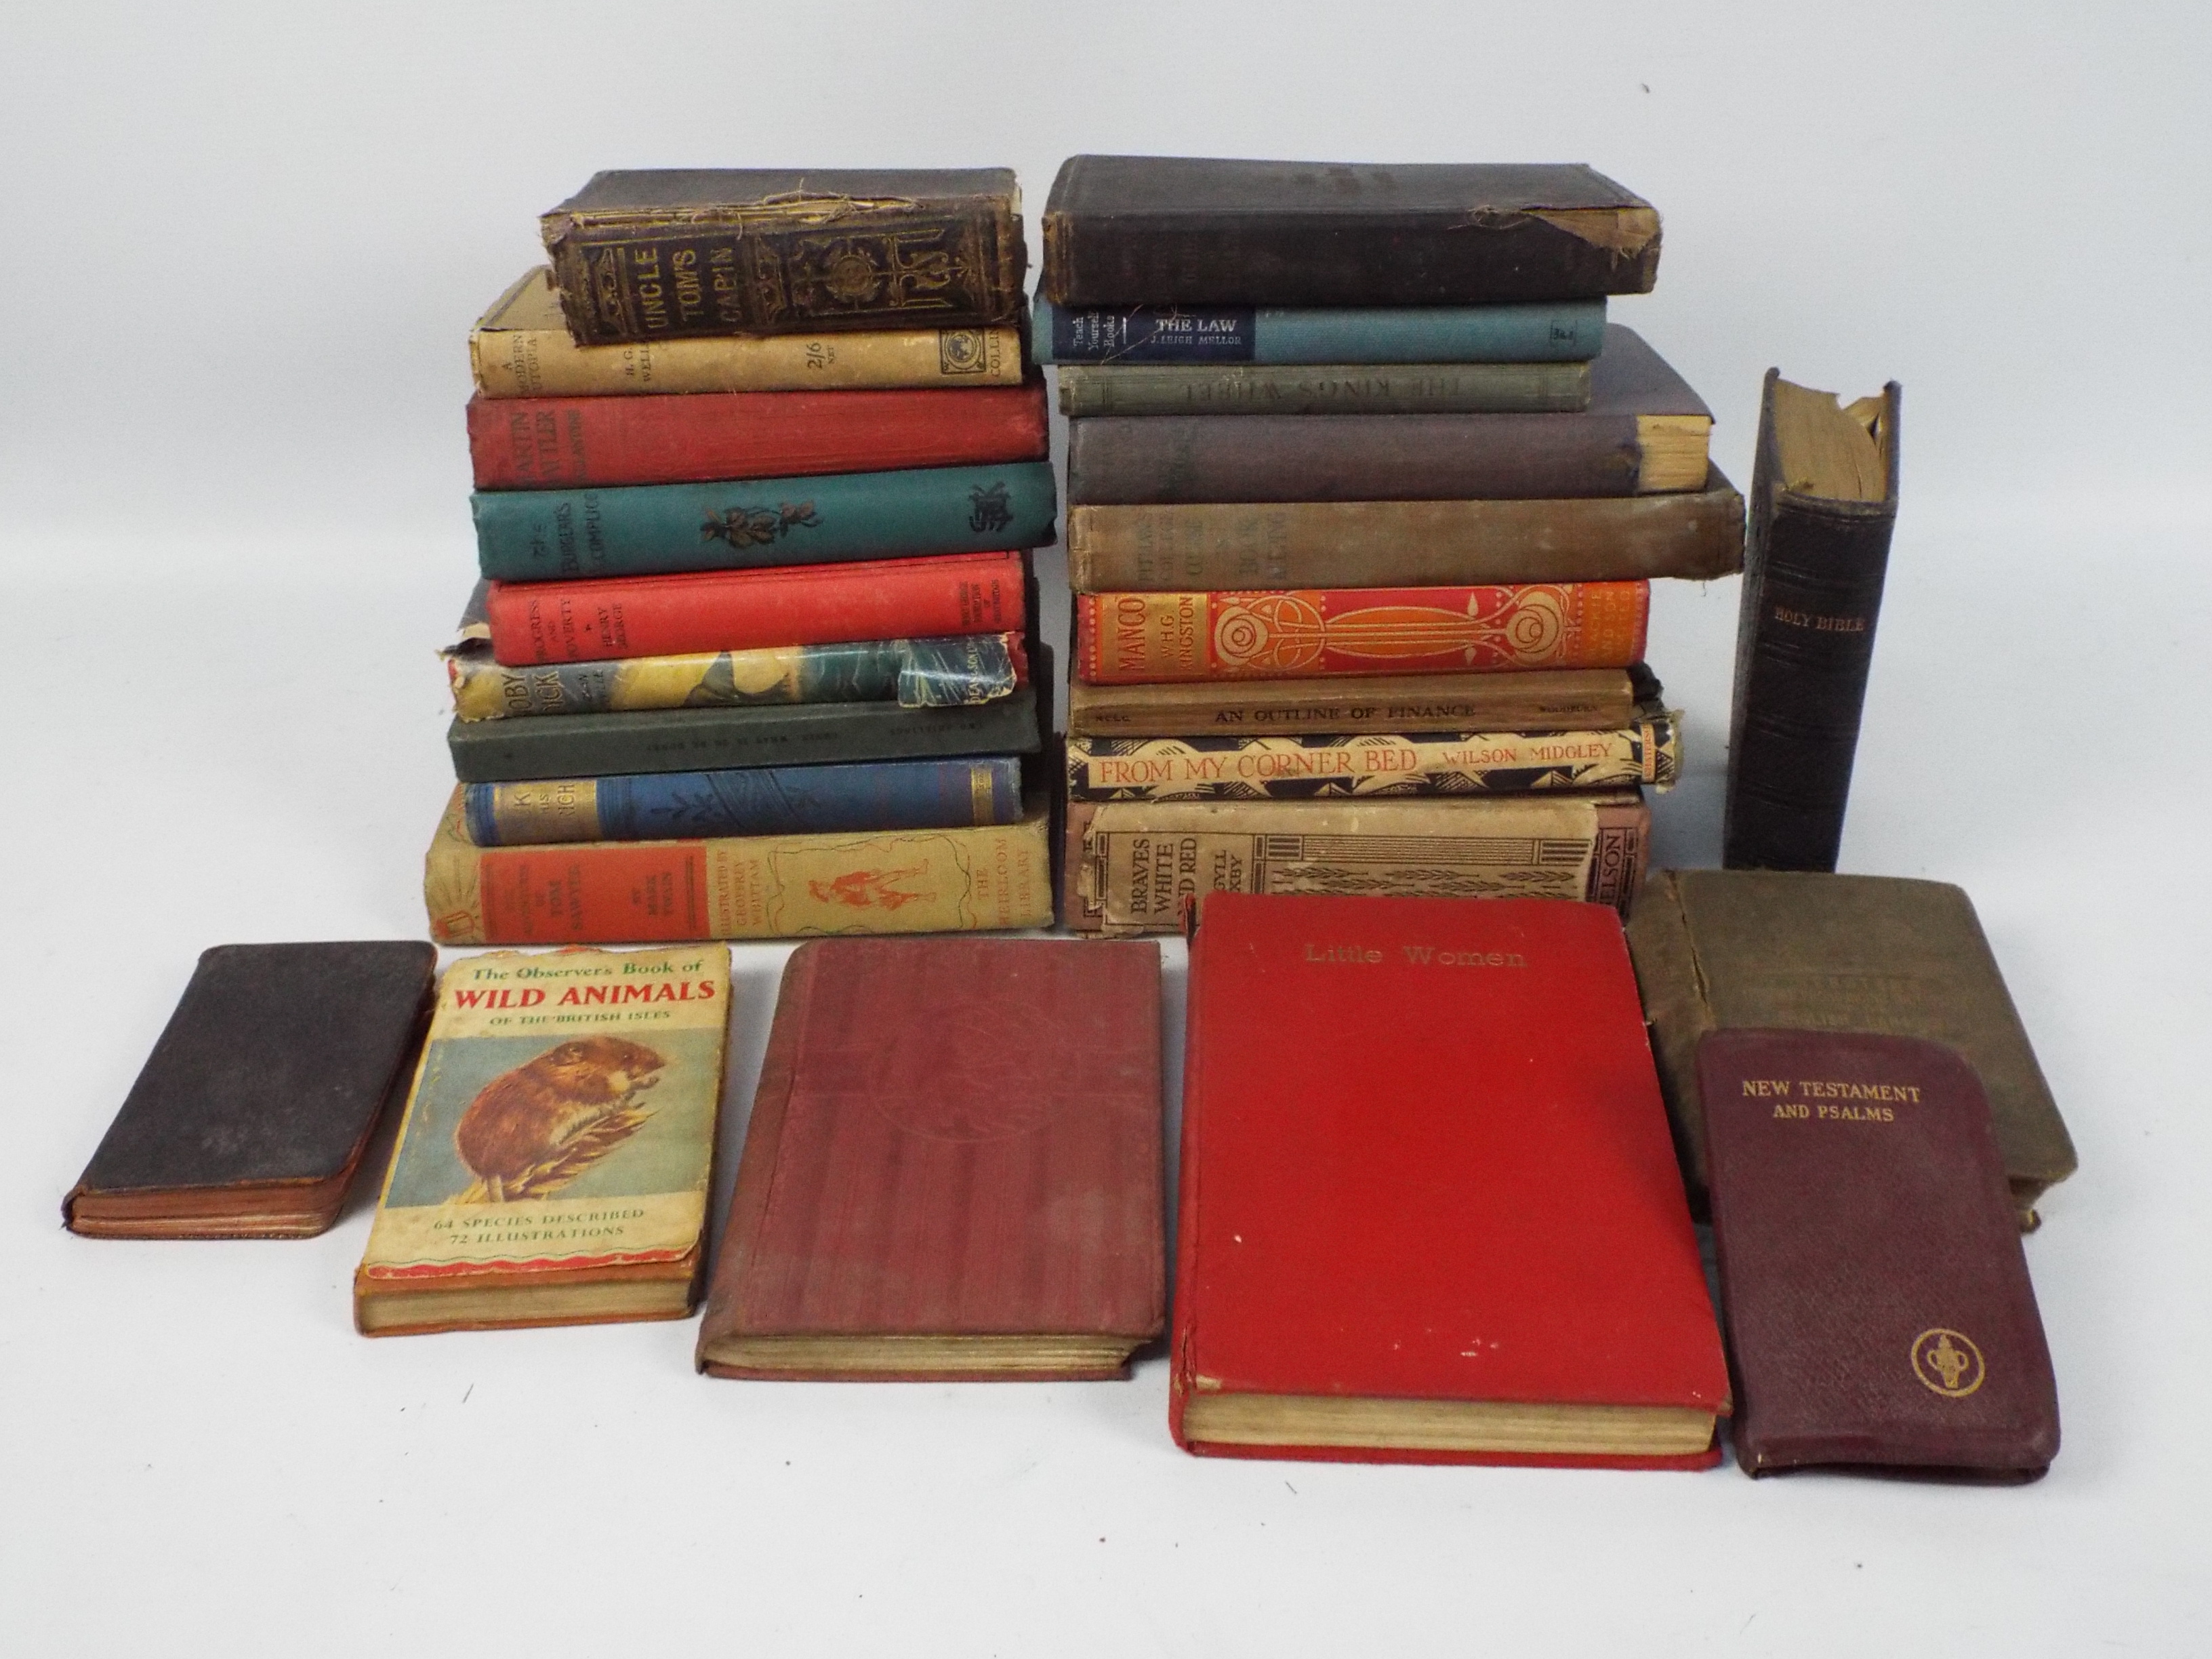 A collection of vintage publications.